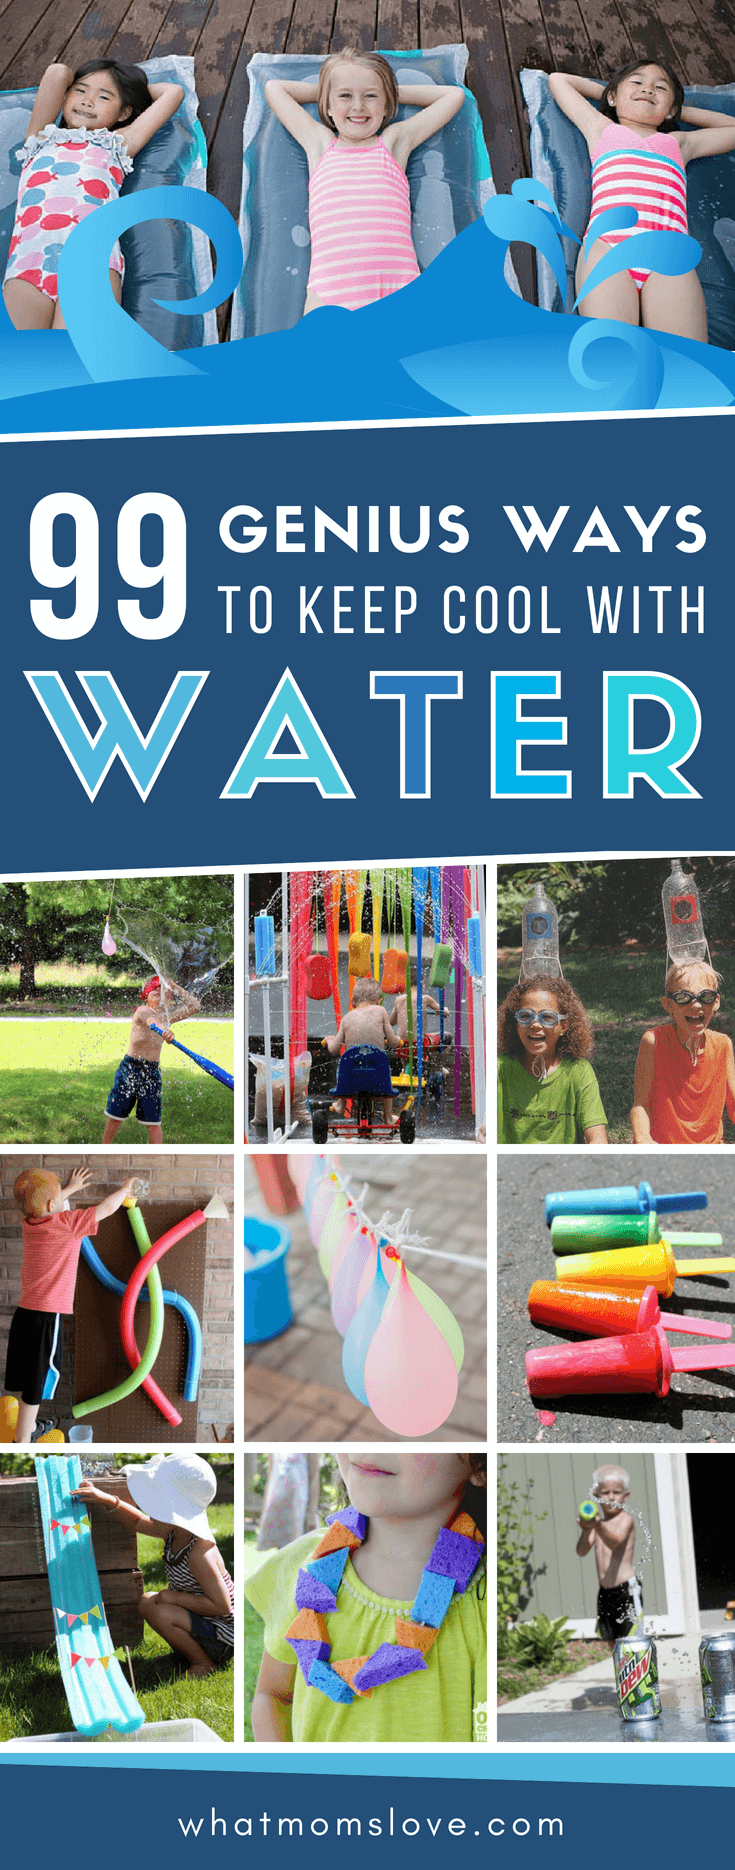 29 Best Water Games for Kids and Adults - Play Party Plan